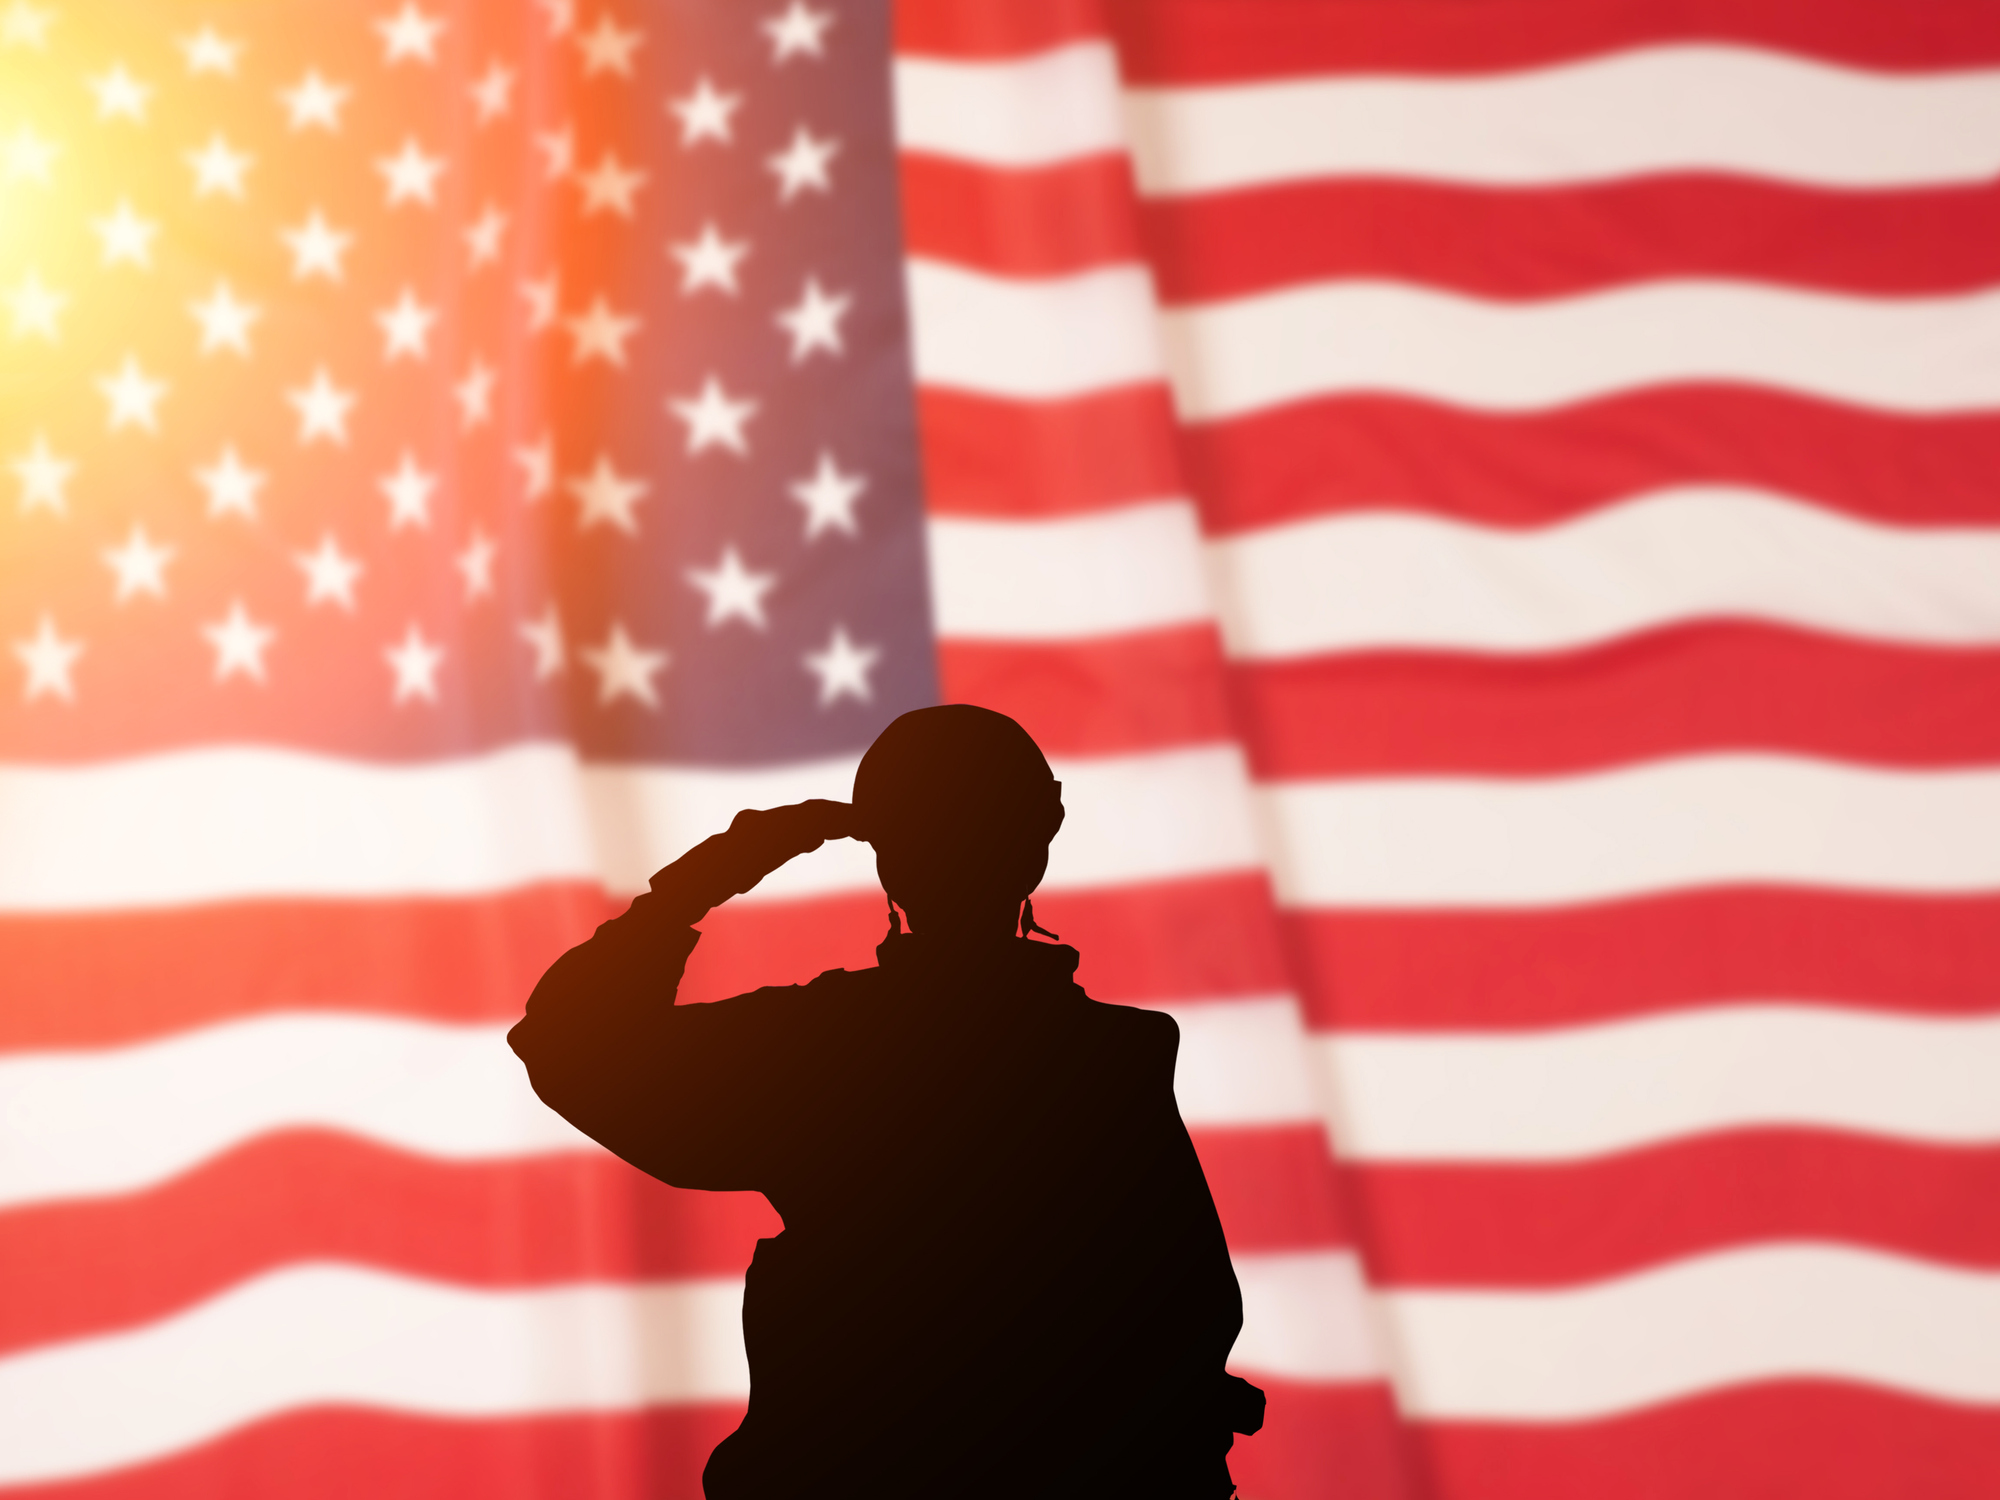 For Veterans Day many restaurants and businesses on Long Island are offering special discounts for veterans